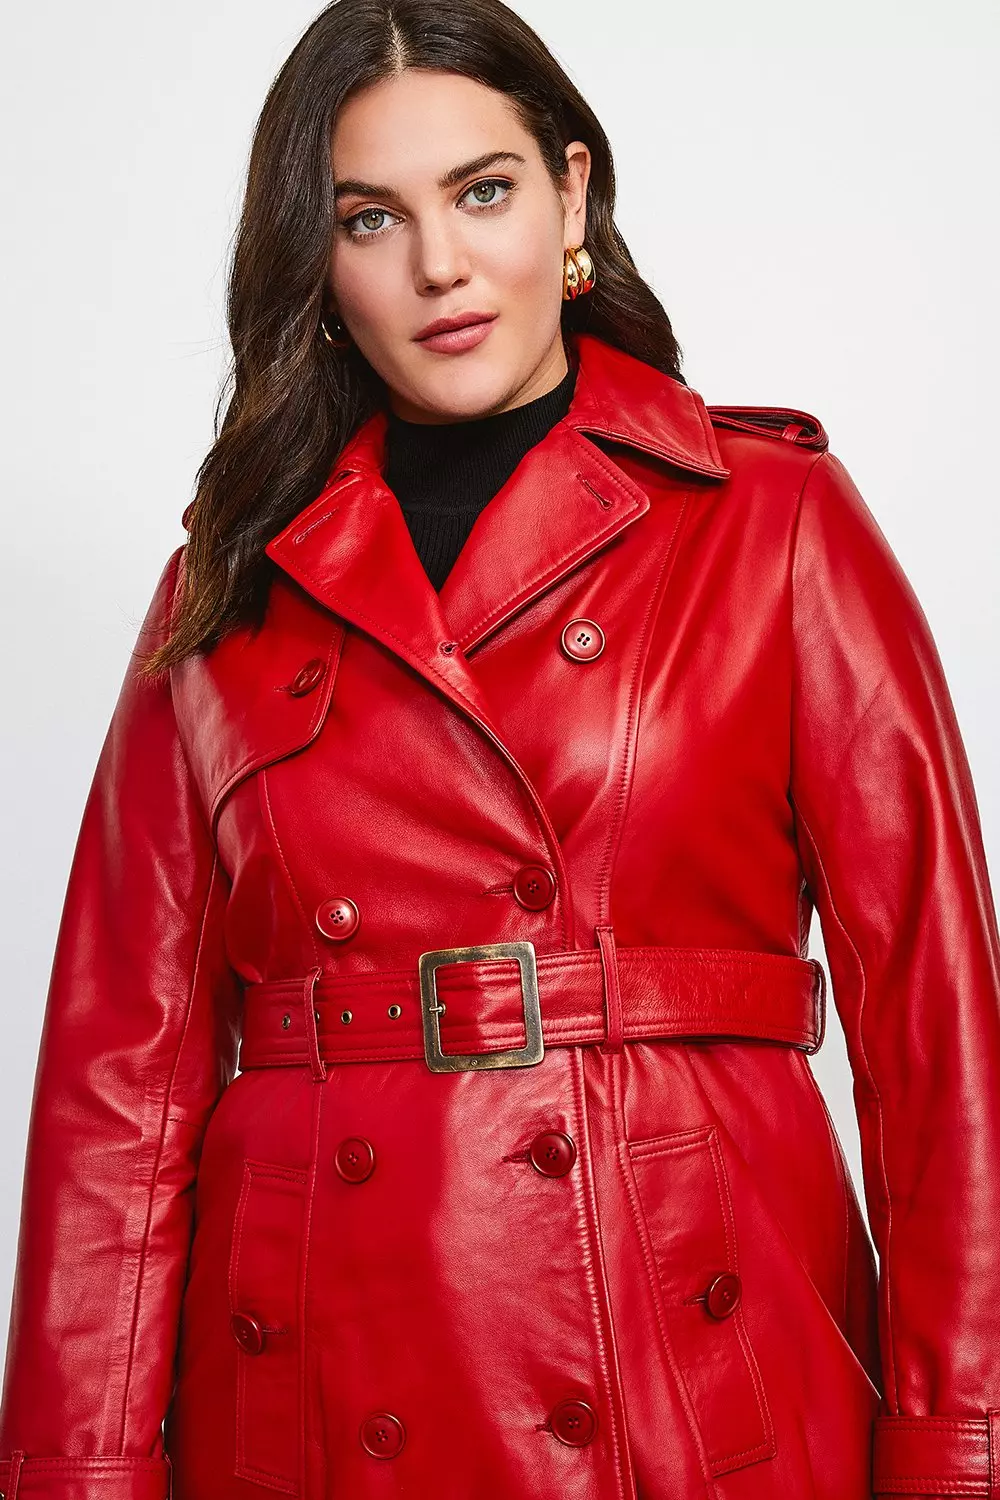 Women's Leather & Faux Plus Size Woman Double Breasted Jacket Female Pu  Trench Coat Belt Suede Overcoat Long Black Red 4XL 5XL